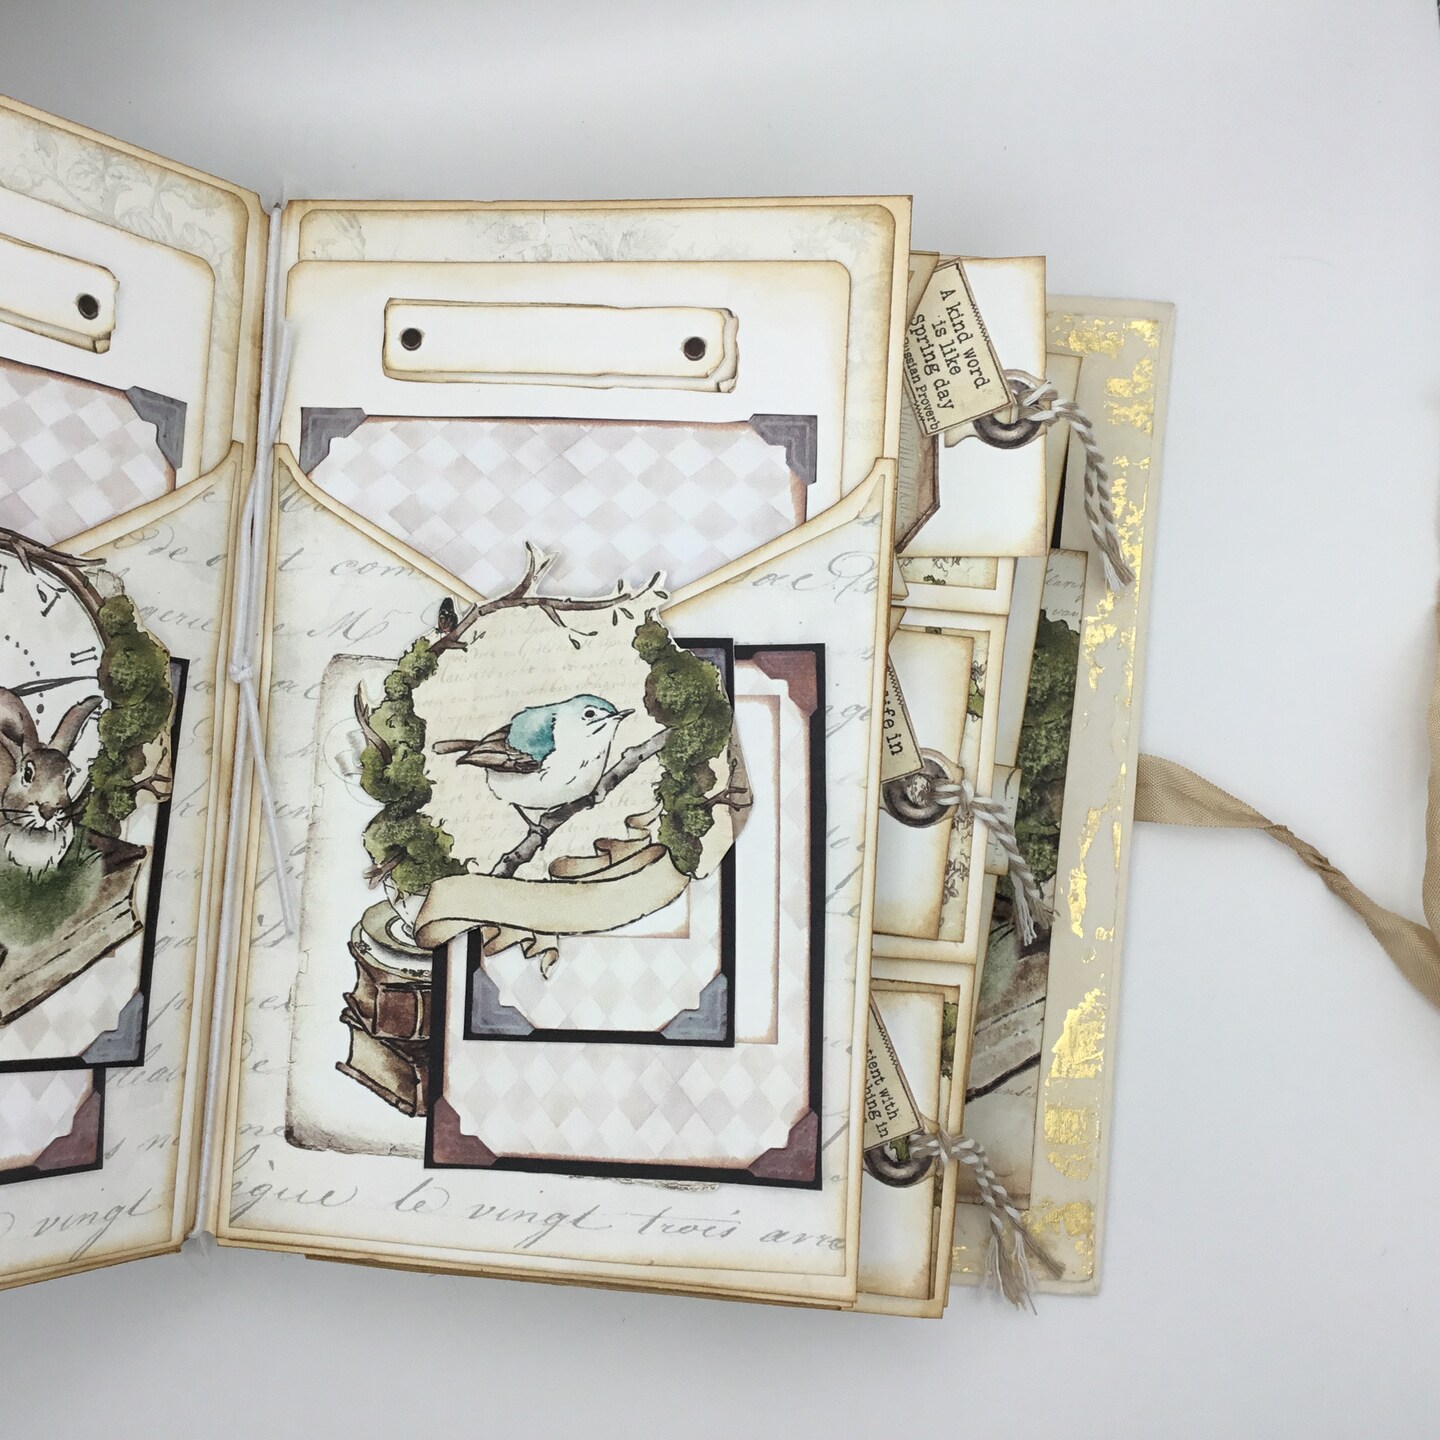 Photo Album and Journal, junk journals, scrapbook journal, gift, Nature  Lover “Into the Woods”